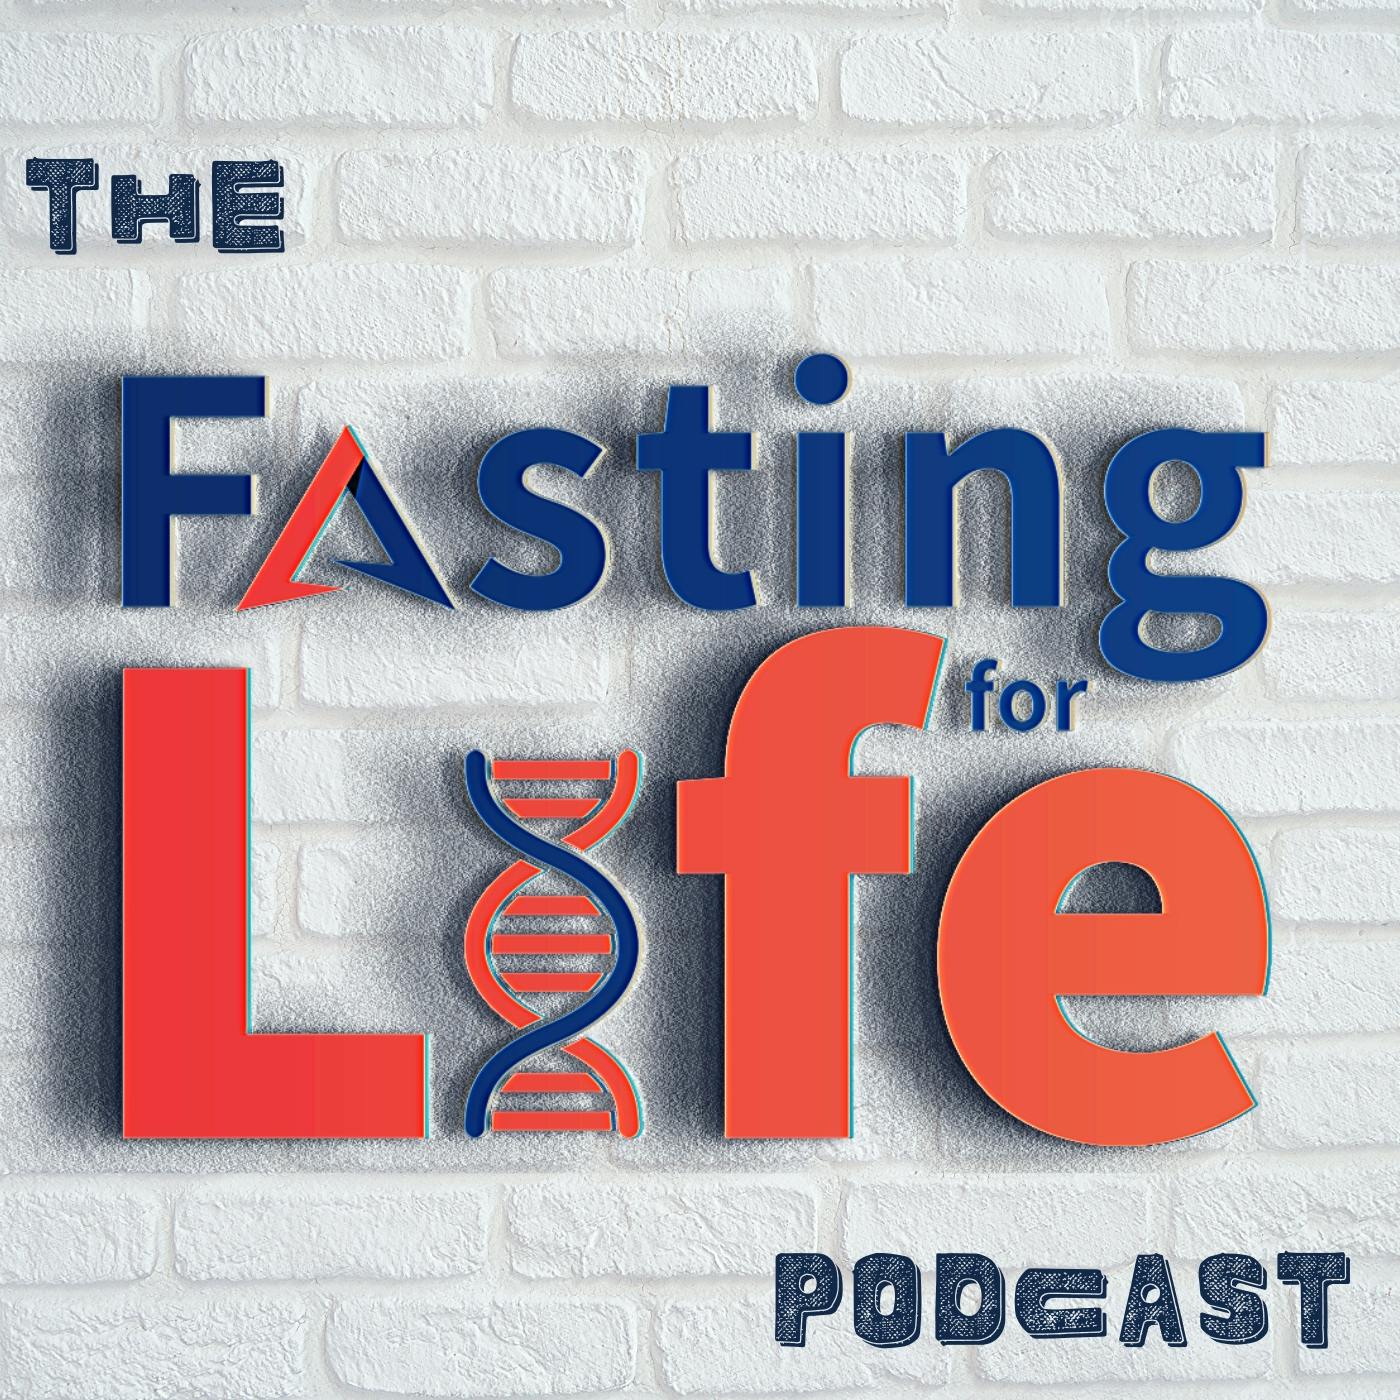 Ep. 168 - If you’re Fasting, How much should you worry about the foods you eat? | Are your relationships with Foods affecting your Fasting? | CGM Experiment: Carnivore diet fast food | Free Intermit